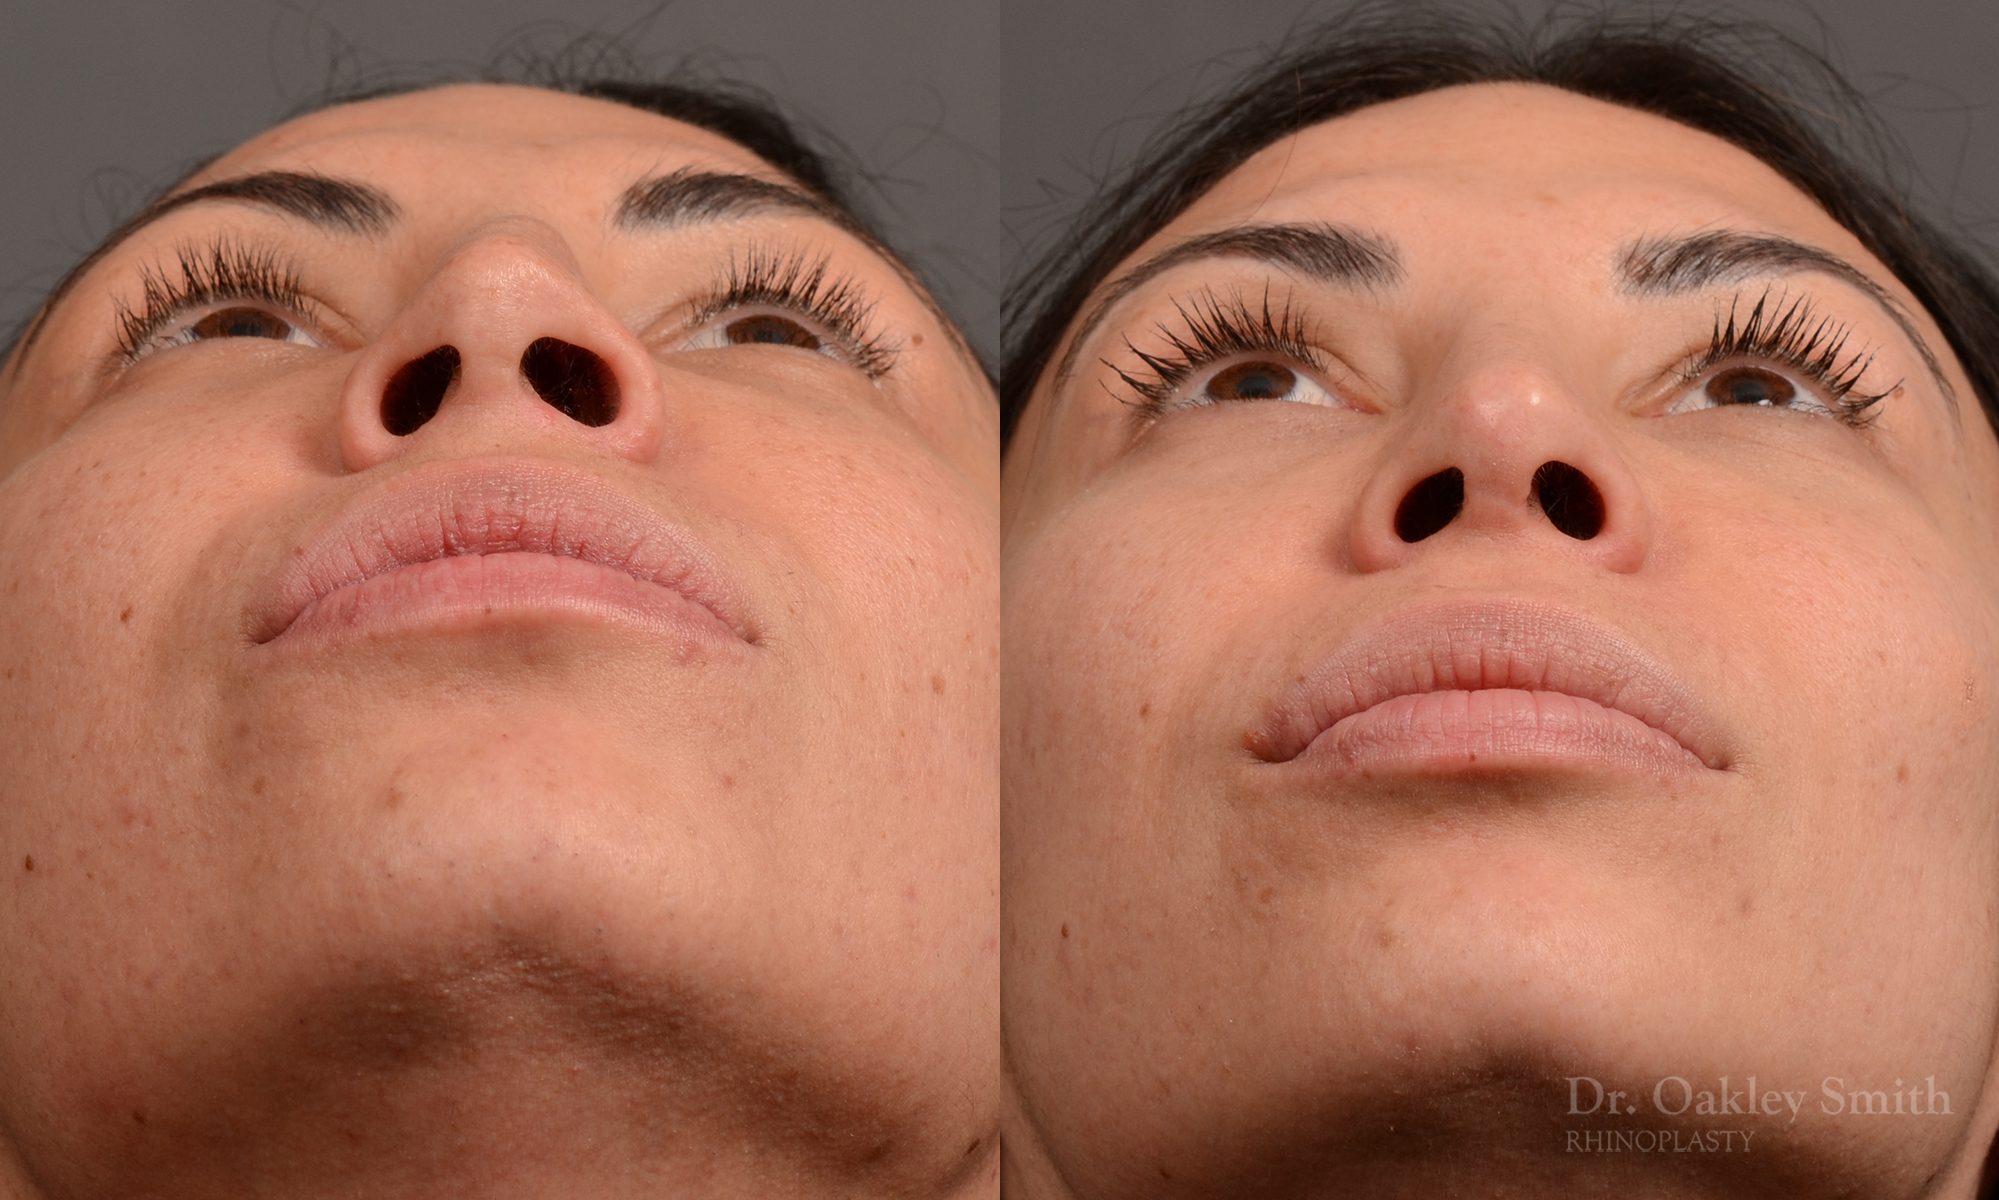 Female rhinoplasty nose surgery to create a more curved nose